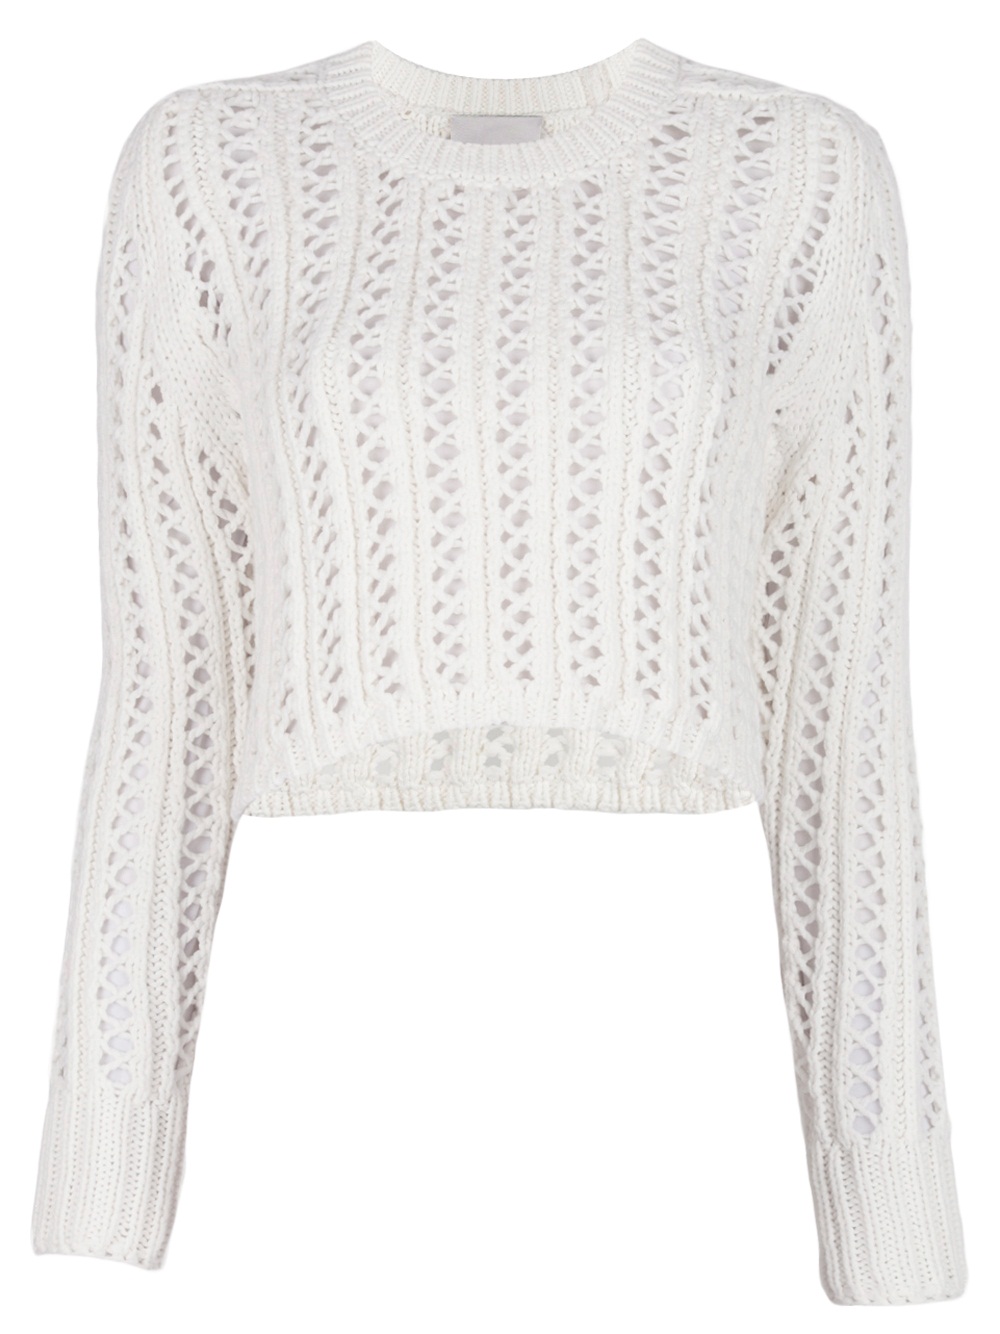 Lyst - 3.1 Phillip Lim Cropped Sweater in White